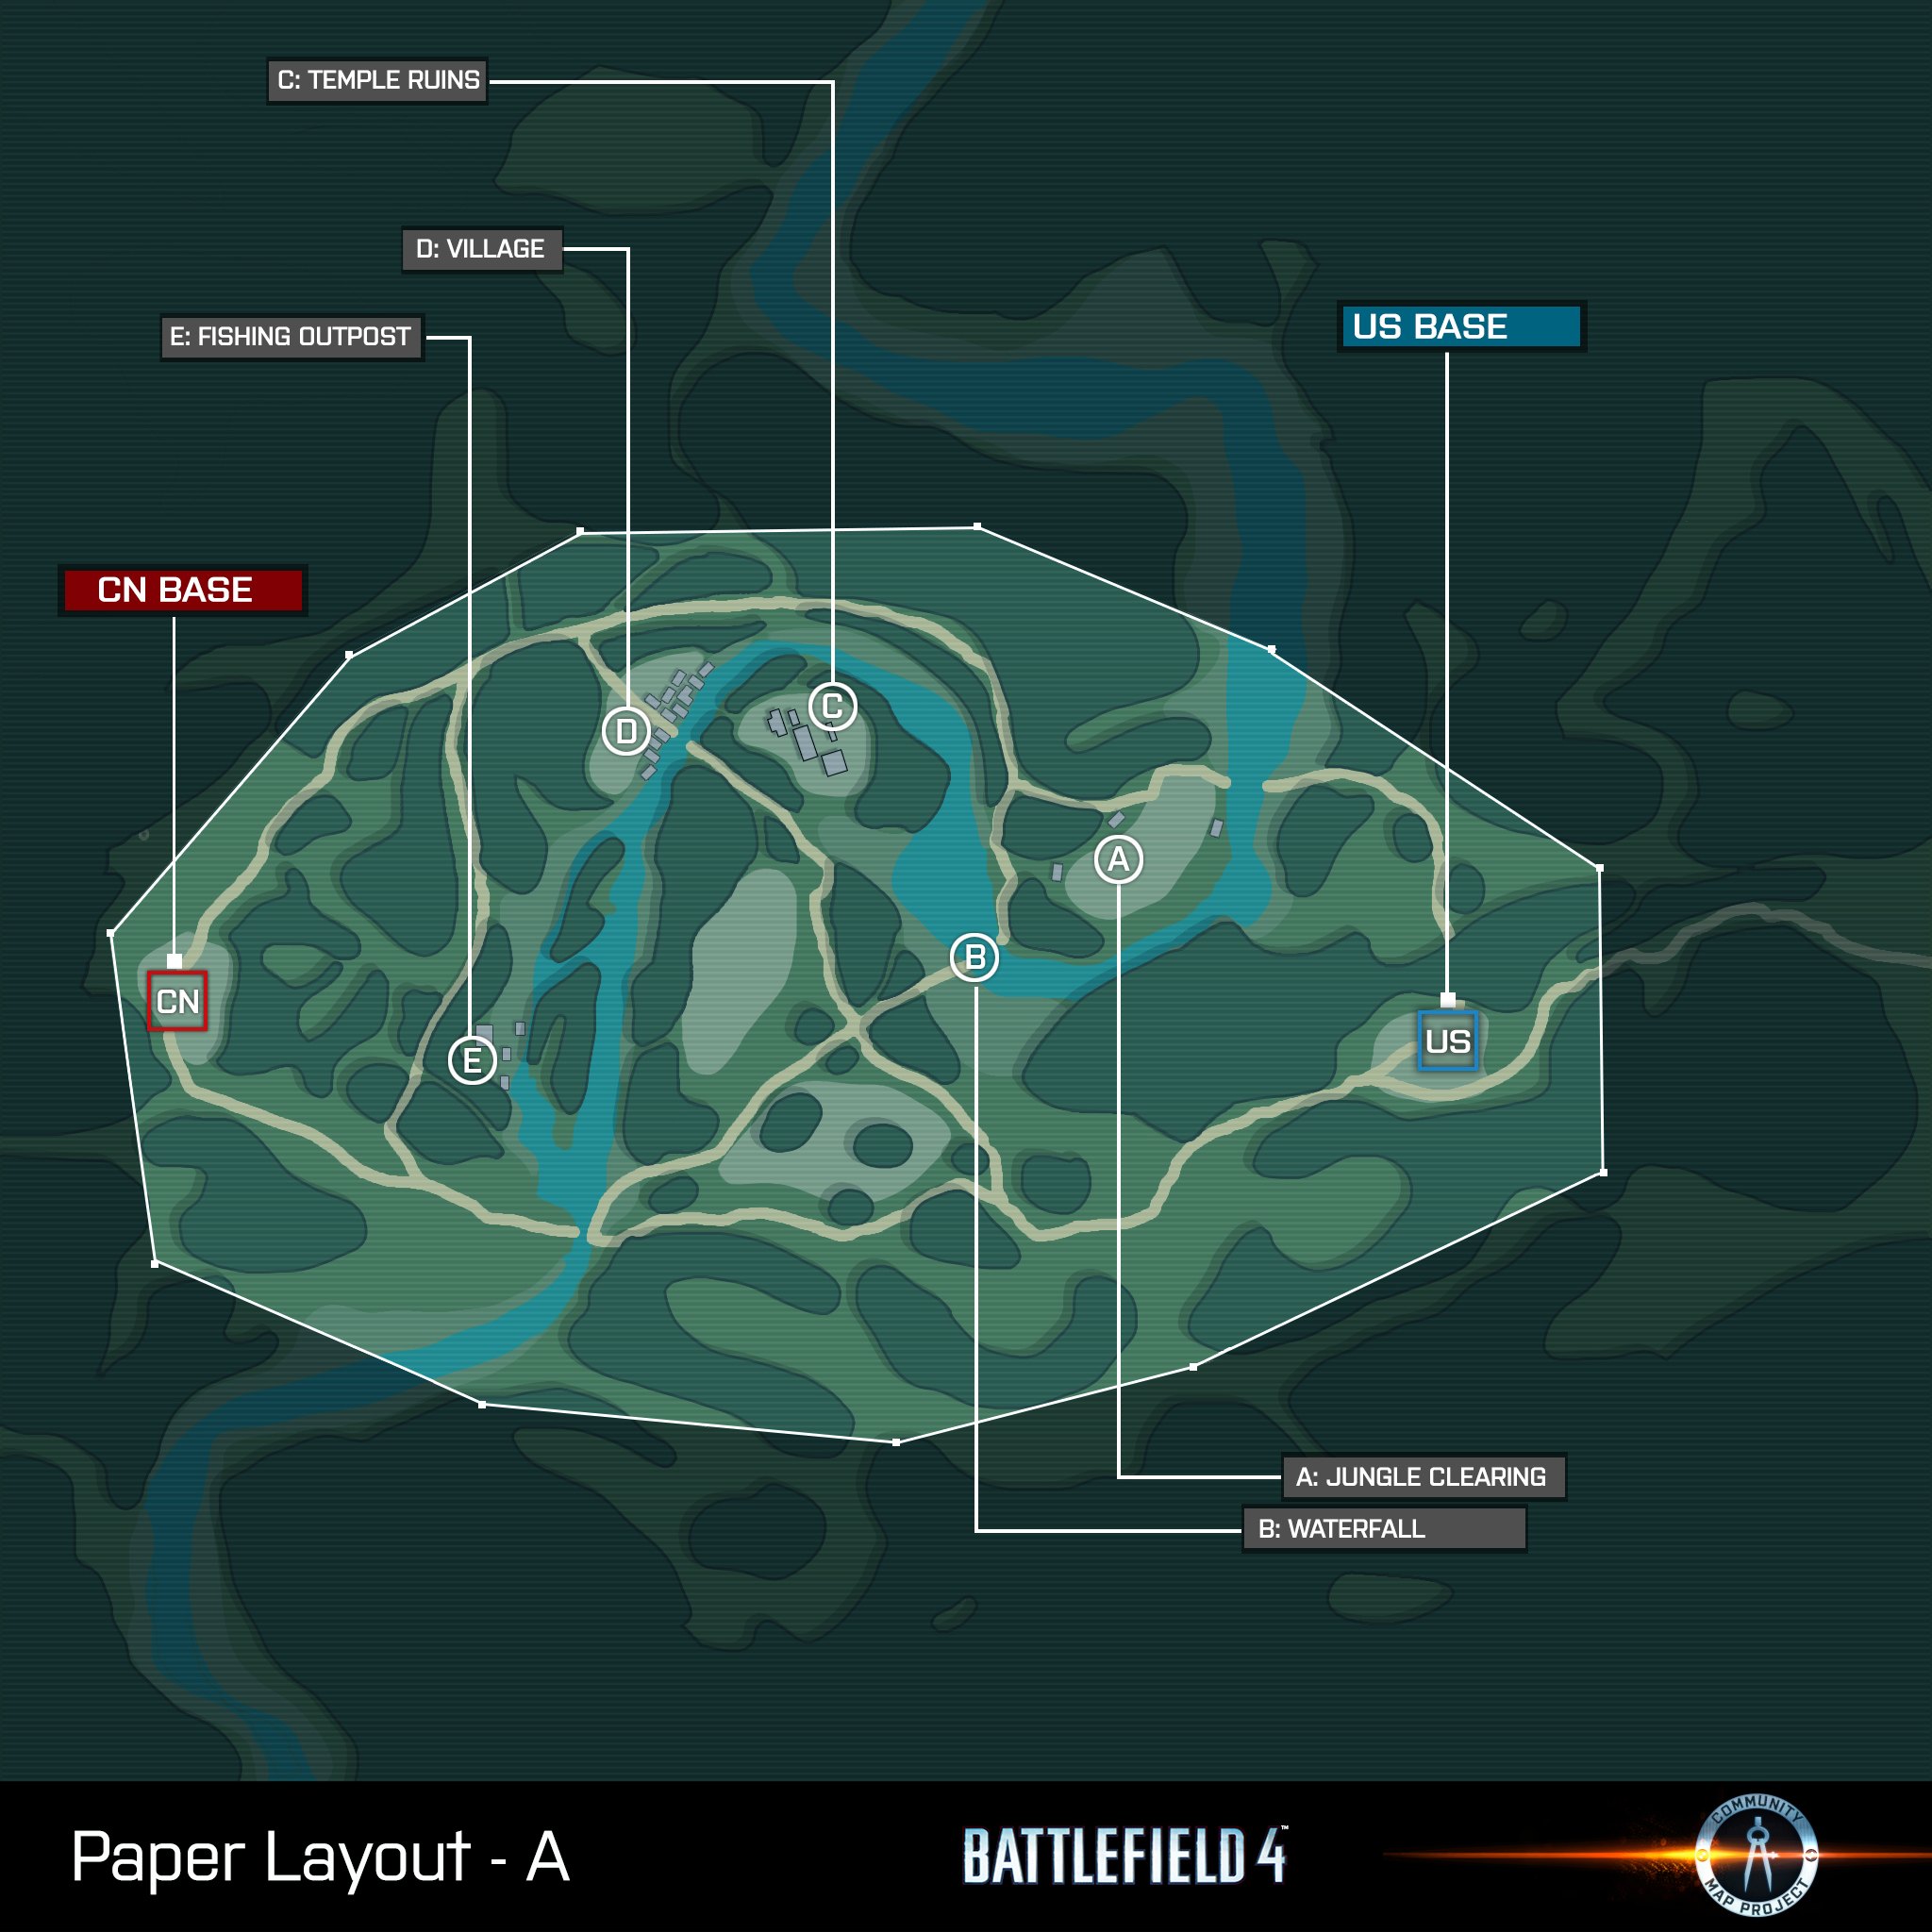 Vote on the Concept and Layout of the Battlefield 4 Community Map Right Now